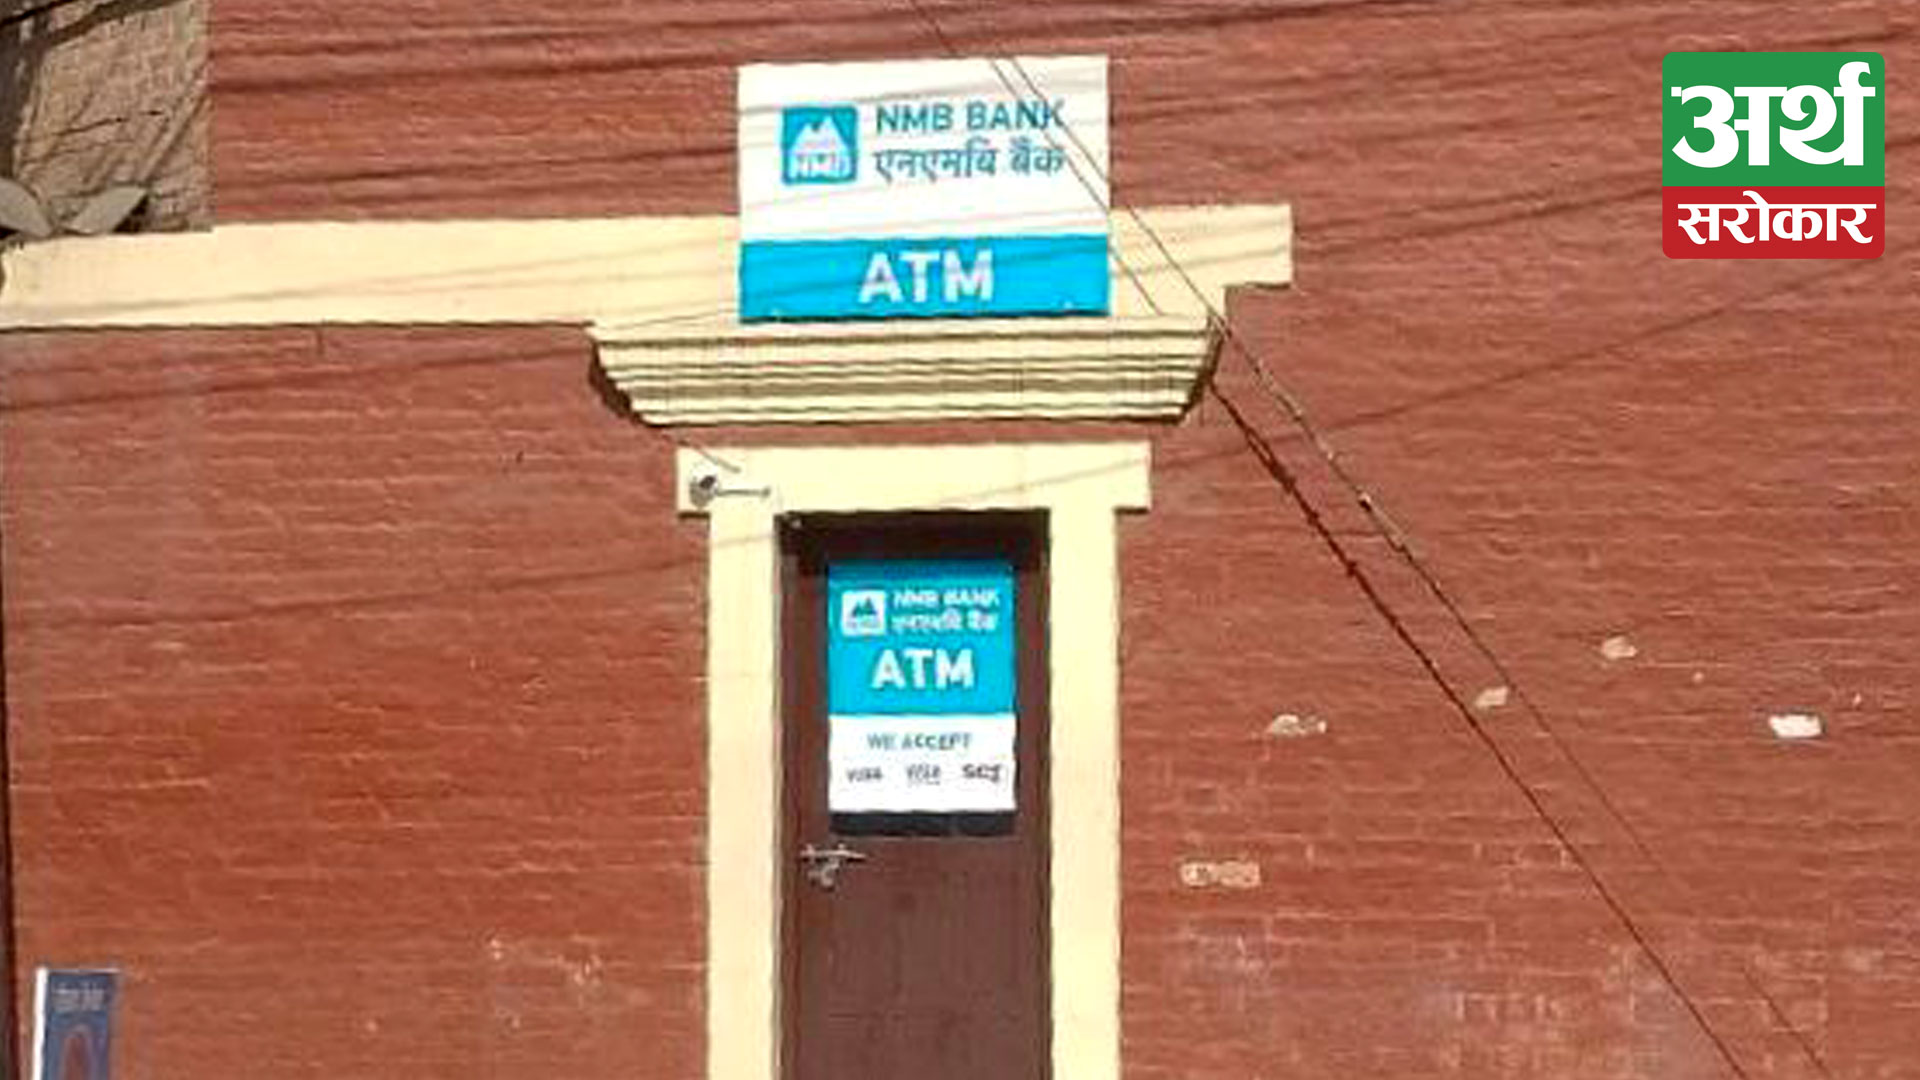 NMB Bank opens new ATM at Thamel -Next to Garden of Dreams